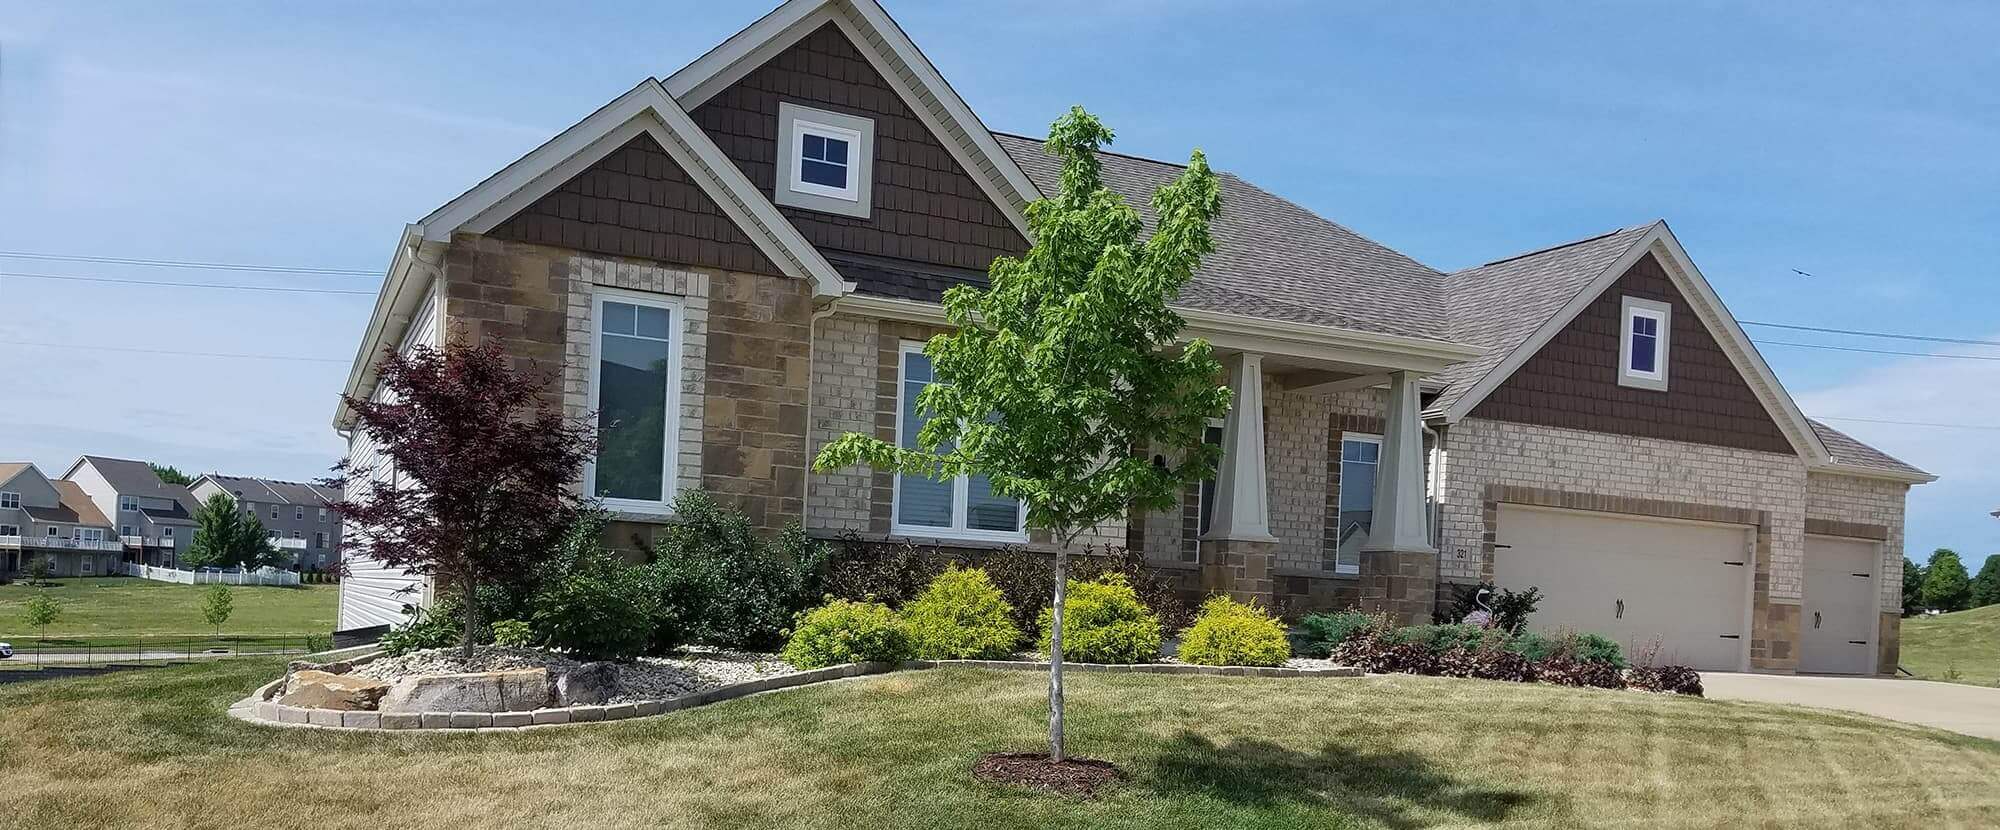 Landscaping Company in St. Louis & St. Charles